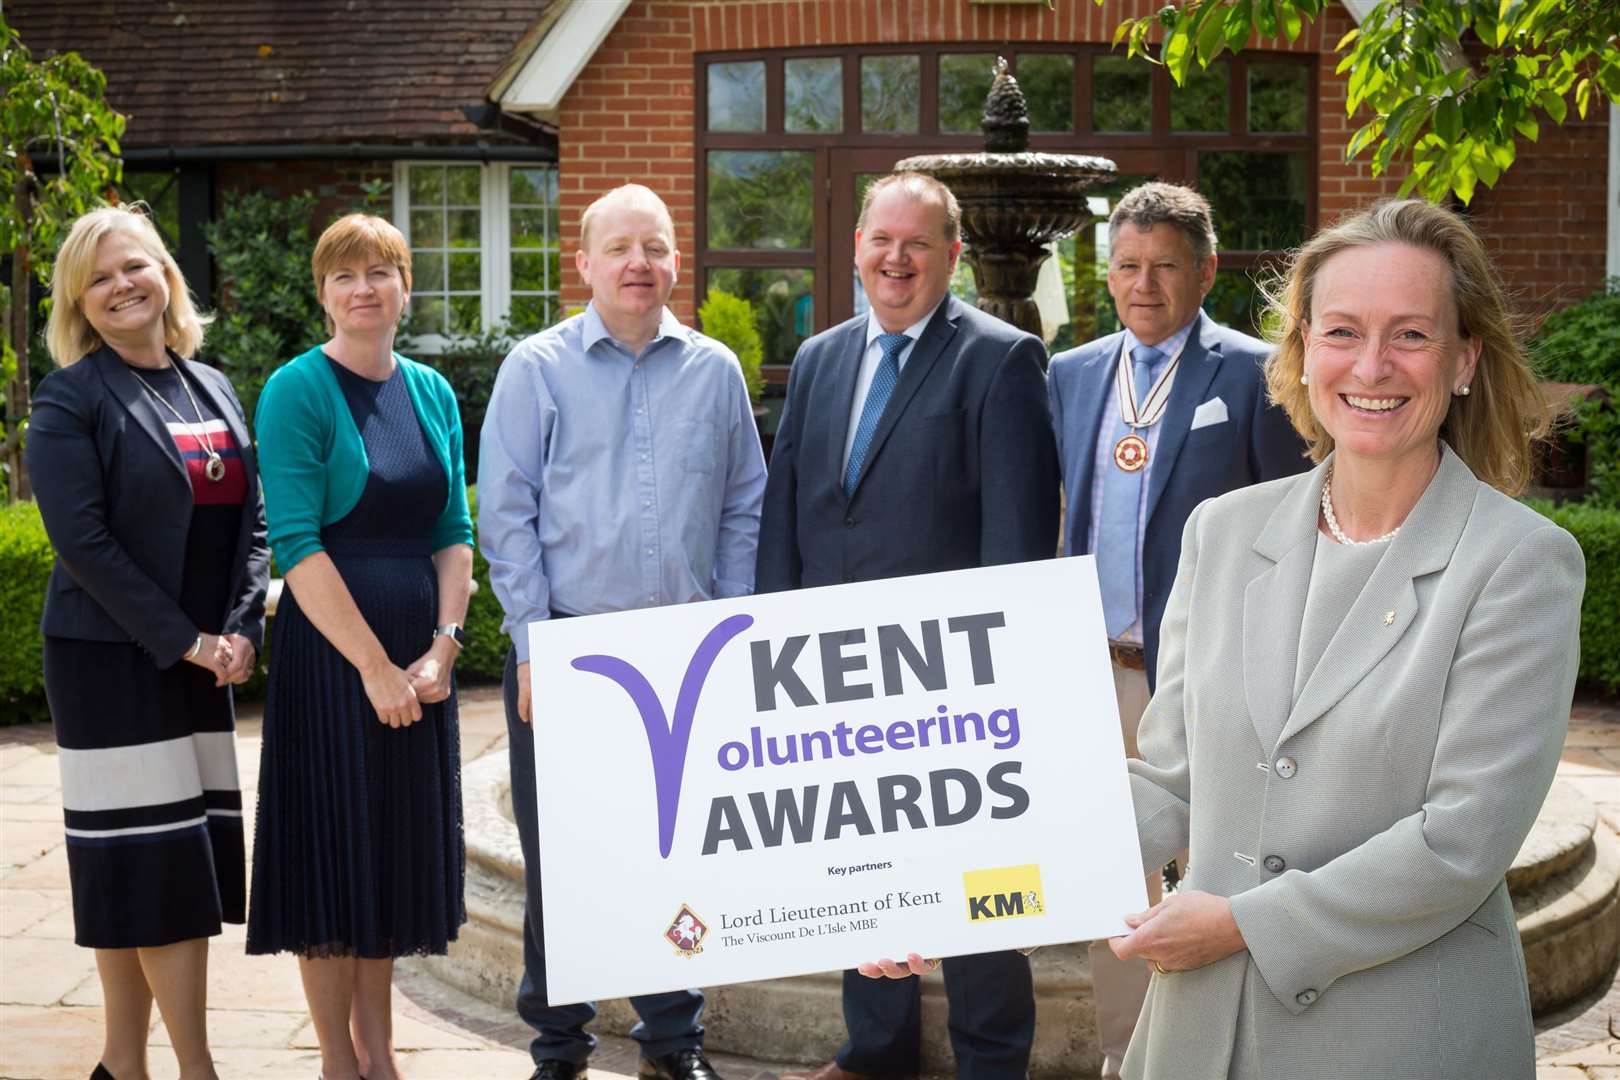 Geraldine Allison of the KM Media Group, front, with partner organisations celebrating the launch of the Kent Volunteering Awards 2019 at Hempstead House, Sittingbourne.